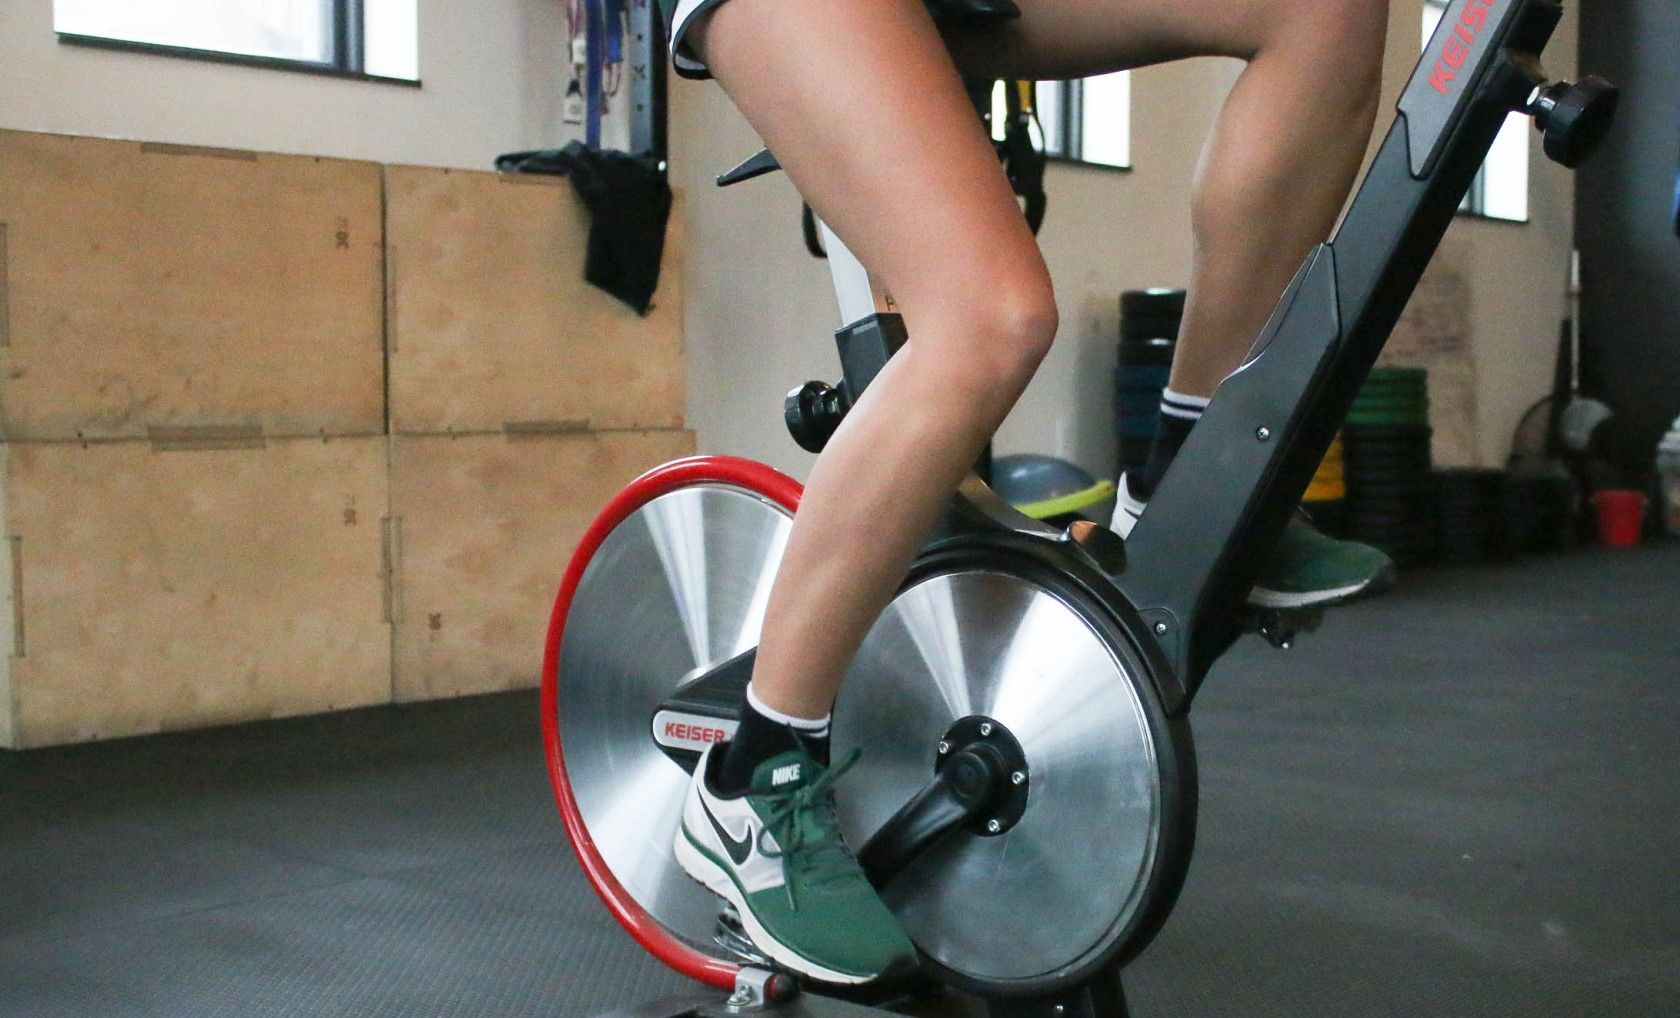 Person exercising on indoor exercise bicycle in gym